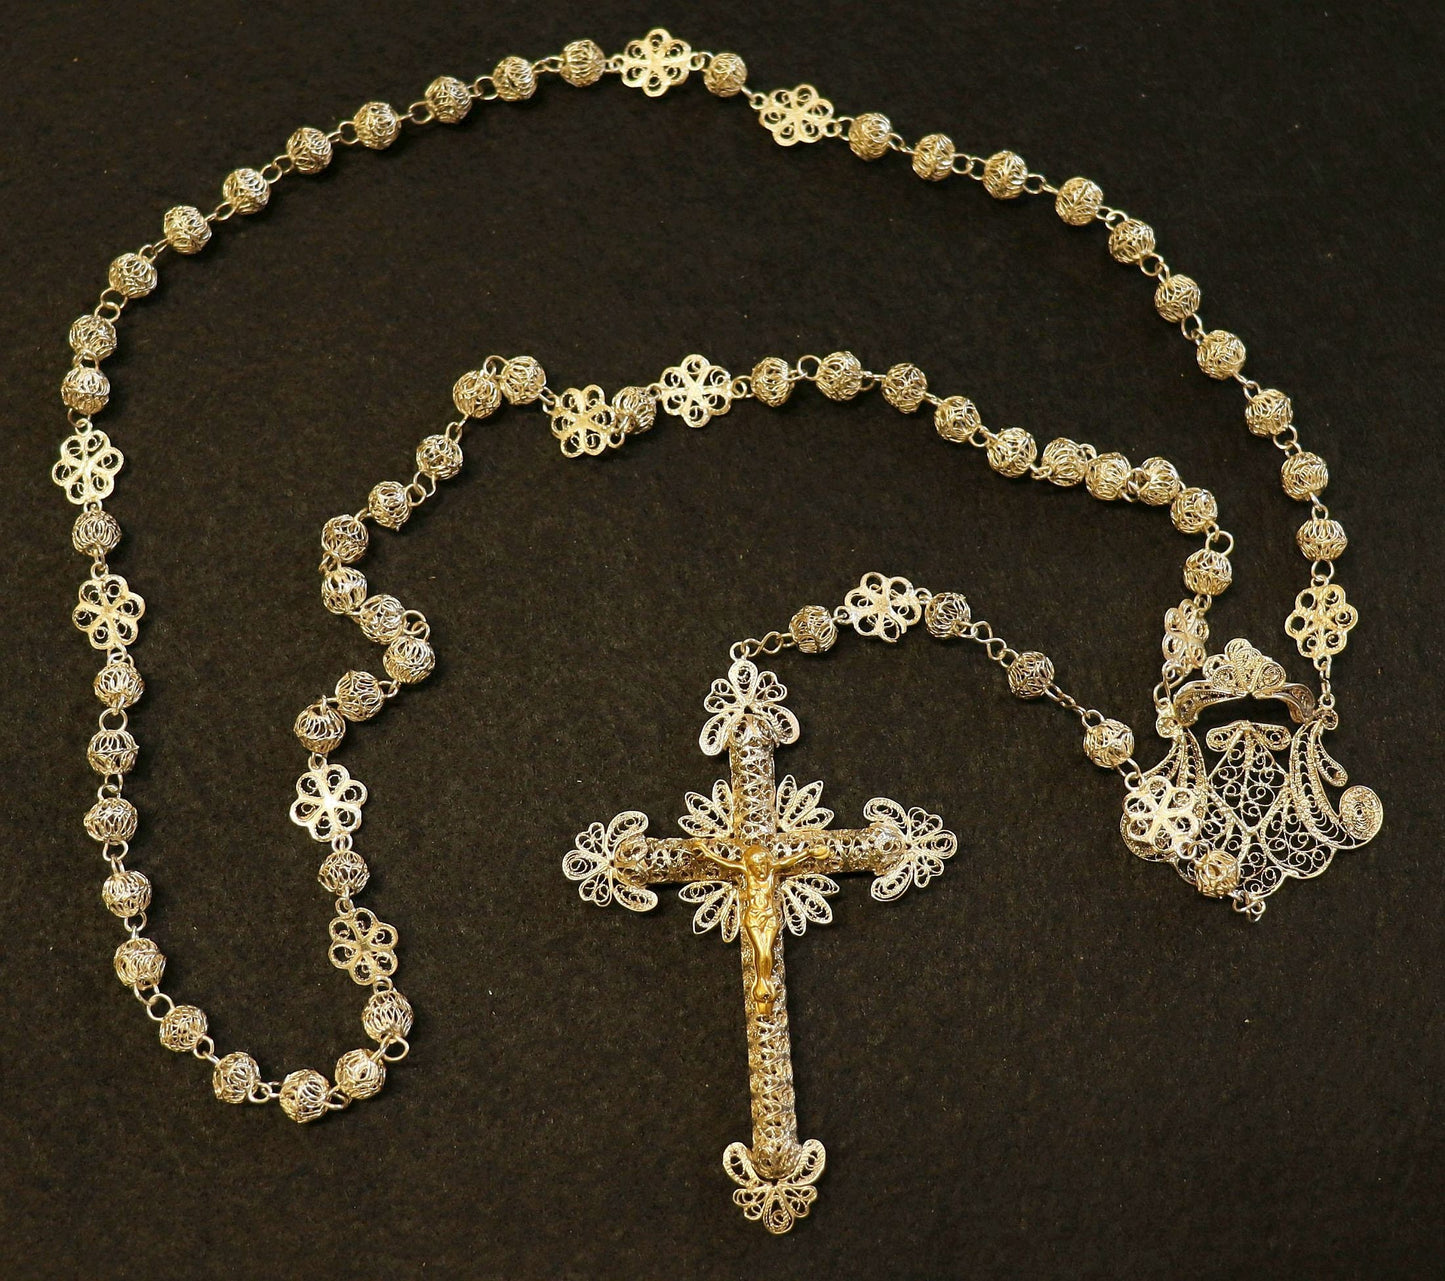 1920's. Sterling Silver and Vermeil Filigree Spanish Catholic Rosary - Collector's